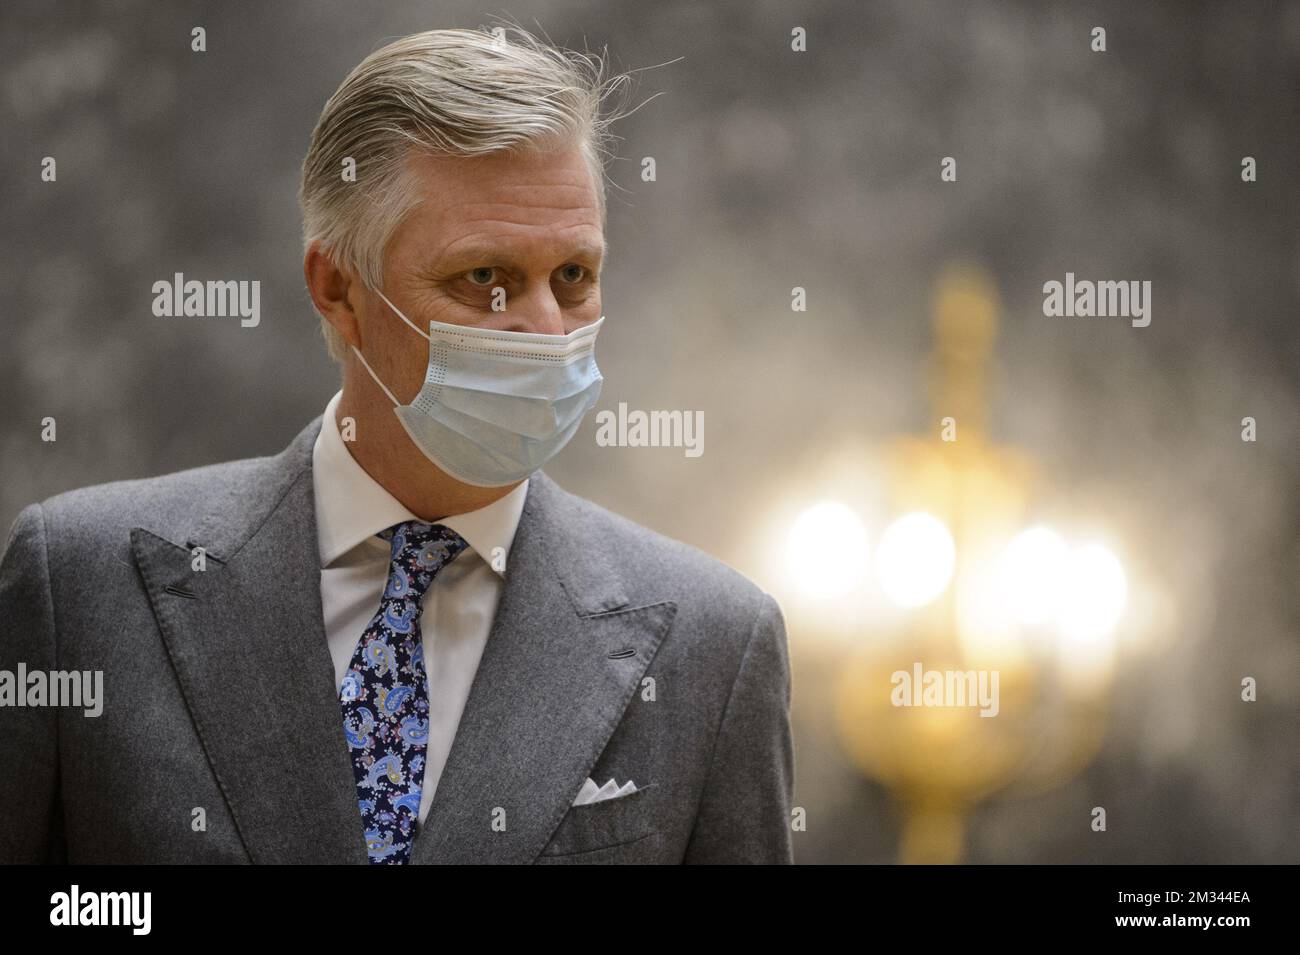 King Philippe - Filip of Belgium pictured at a ceremony to award the 'Francqui-Collen Prize 2020', Wednesday 16 December 2020, in Brussels. The scientific prize, which is often referred to as the 'Belgian Nobel Prize', is awarded by The Francqui Foundation and is worth 250.000 euros. BELGA PHOTO POOL CHRISTOPHE LICOPPE  Stock Photo